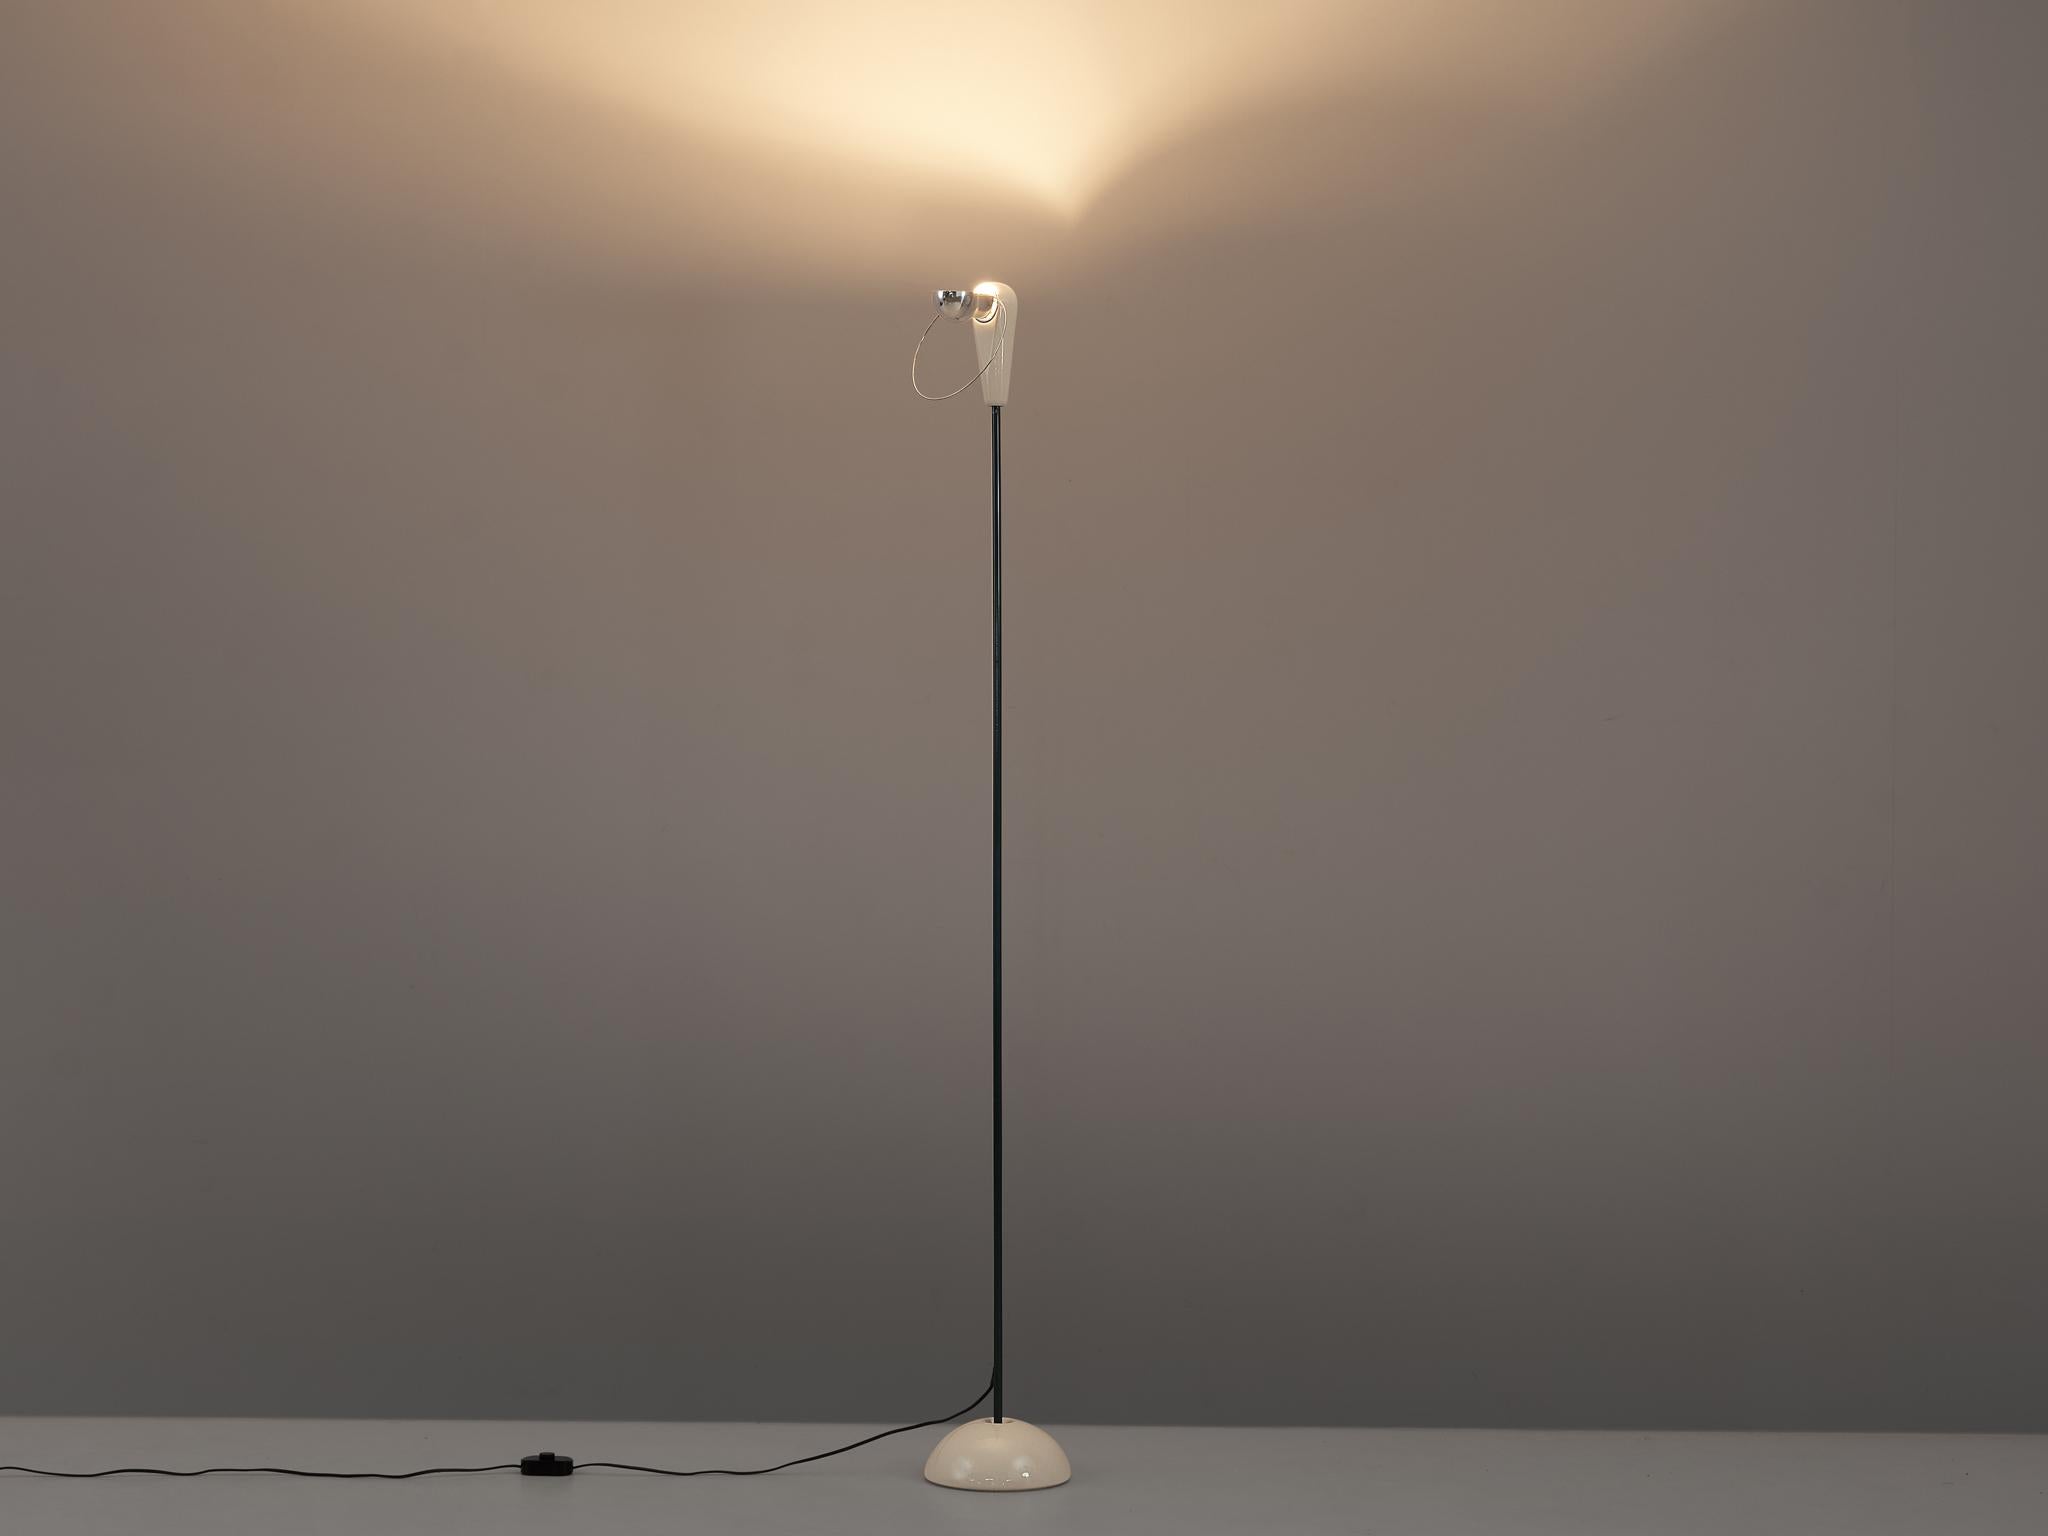 Achille Castiglioni for Flos, floor lamp model ‘Bi Bip’, ceramic, steel, Italy, 1977

Delicate floor lamp designed by Achille Castiglioni in 1977. The forms but also the materials make this lamp special in its expression. From a half-dome base in